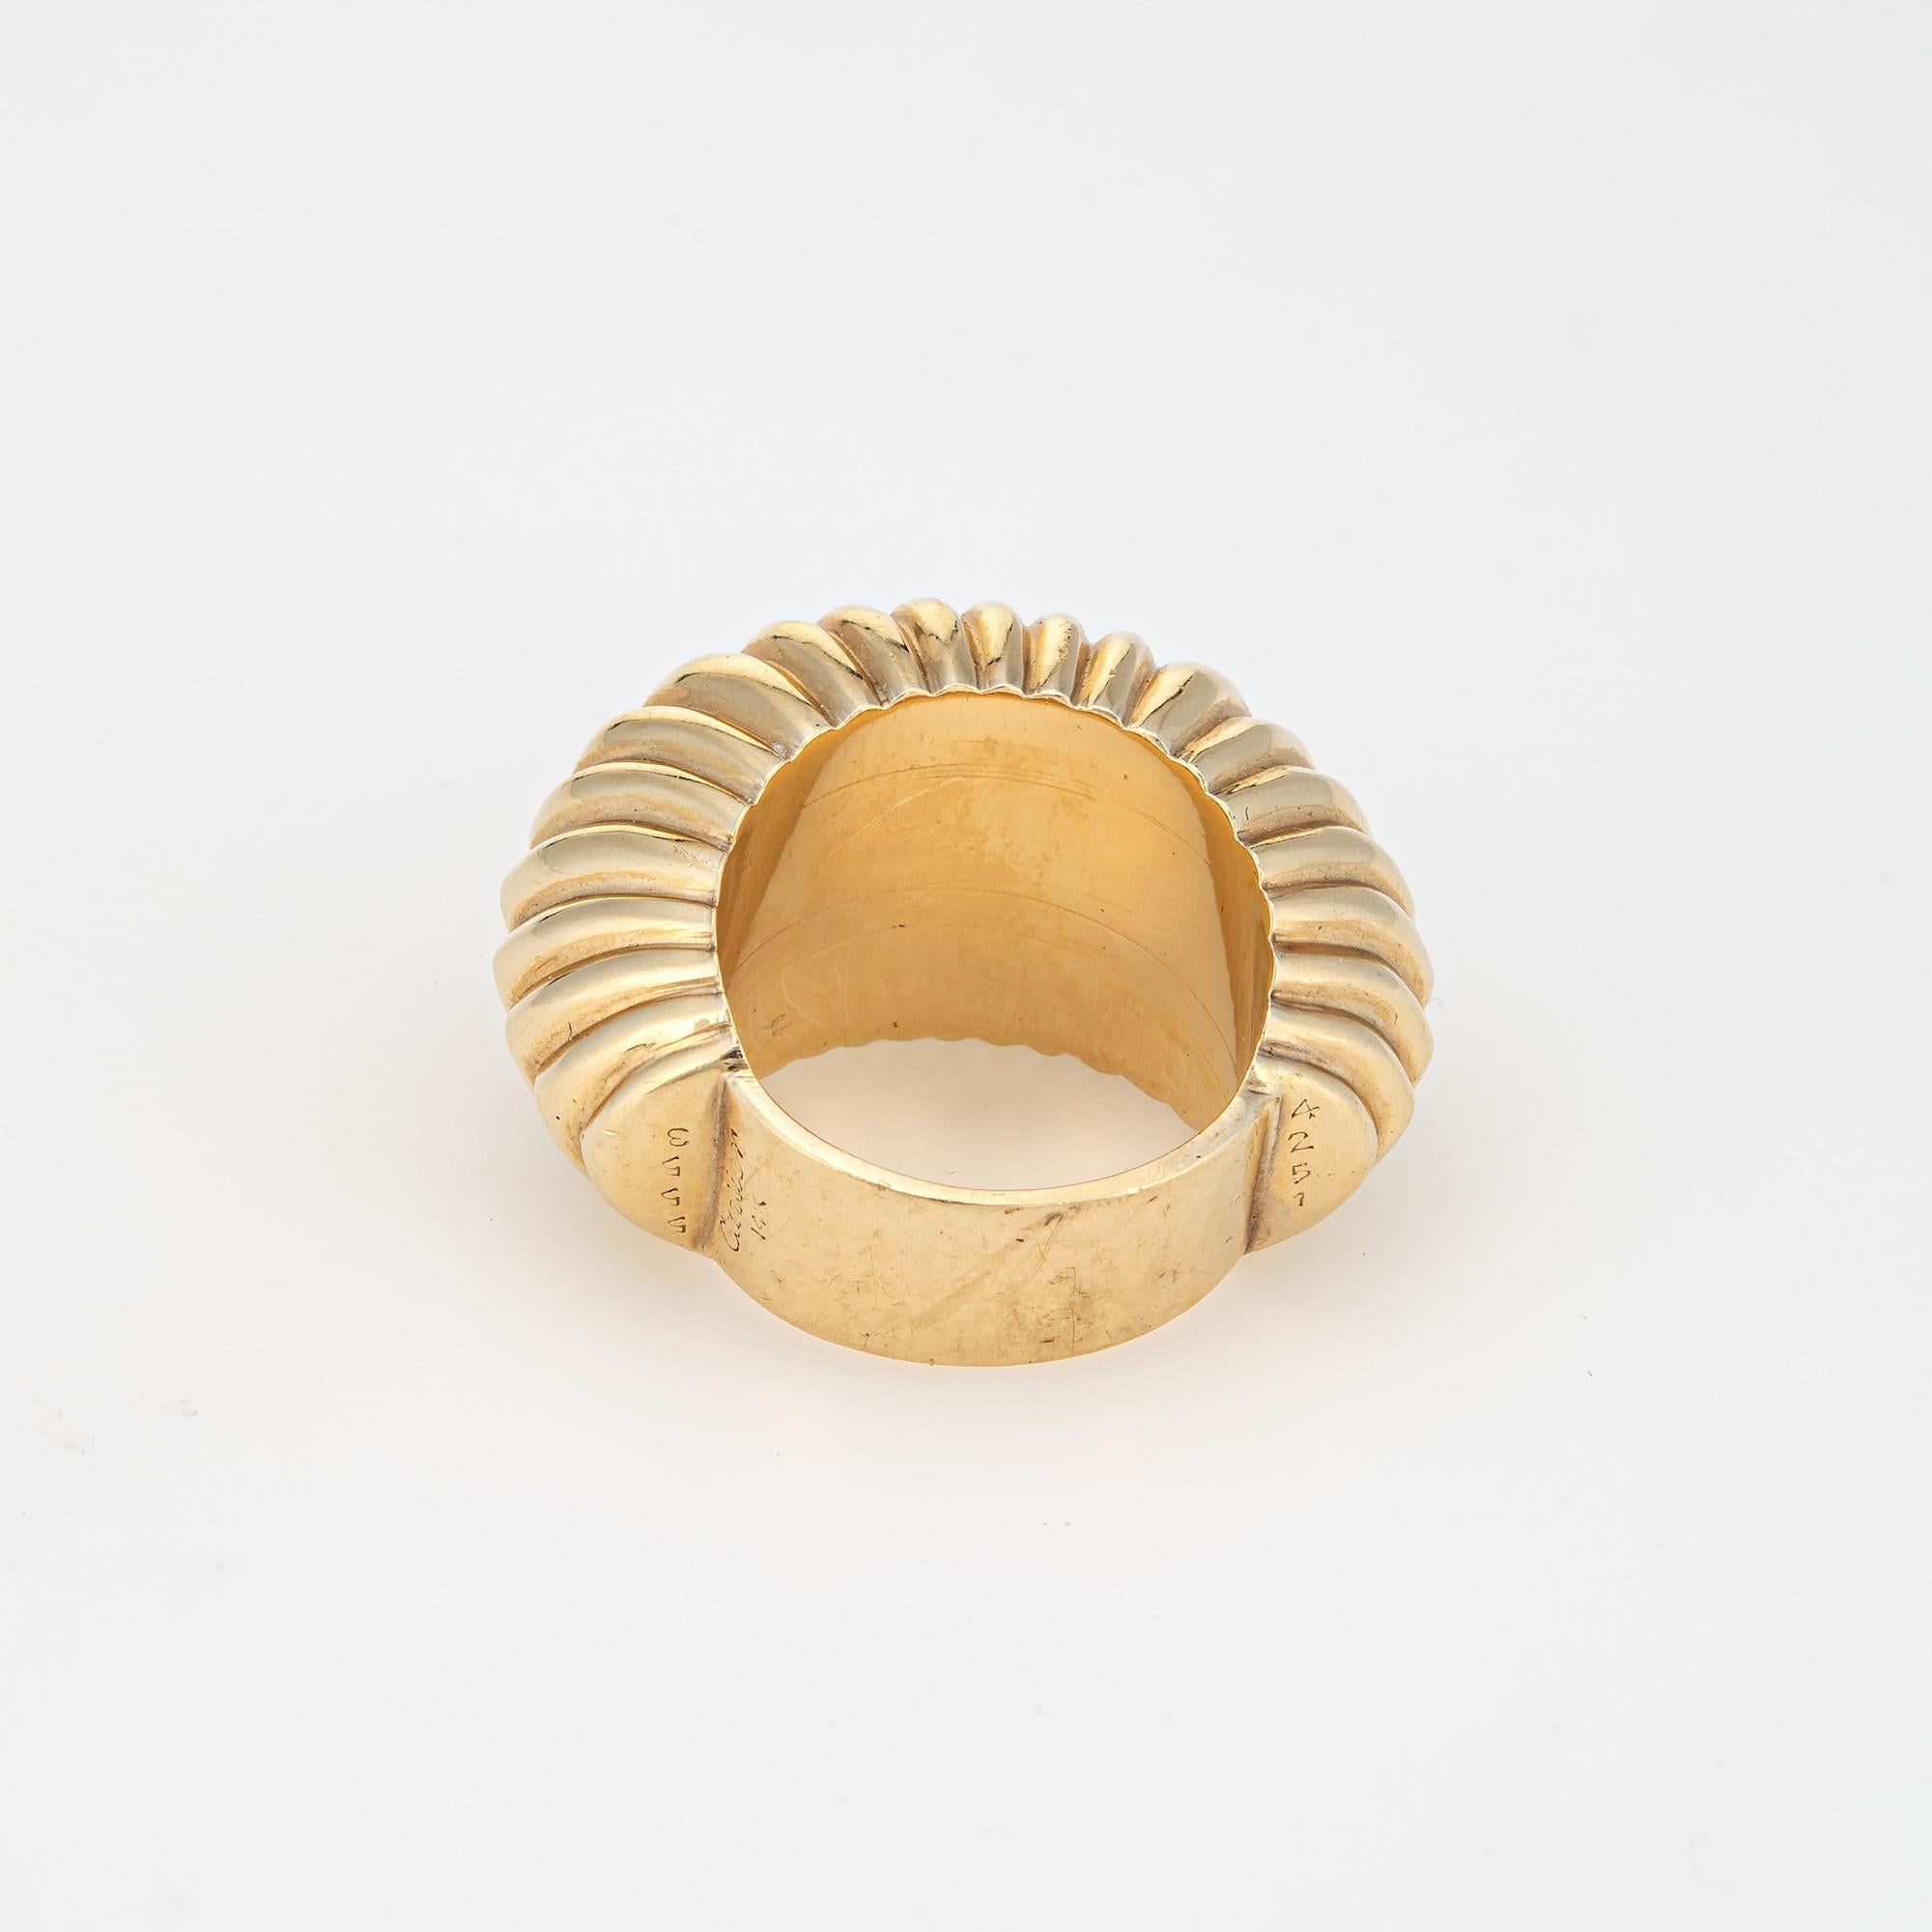 Women's Vintage Cartier Ring c1945 Bombe Fluted Dome 14k Gold Sz 5.75 Shell Jewelry    For Sale